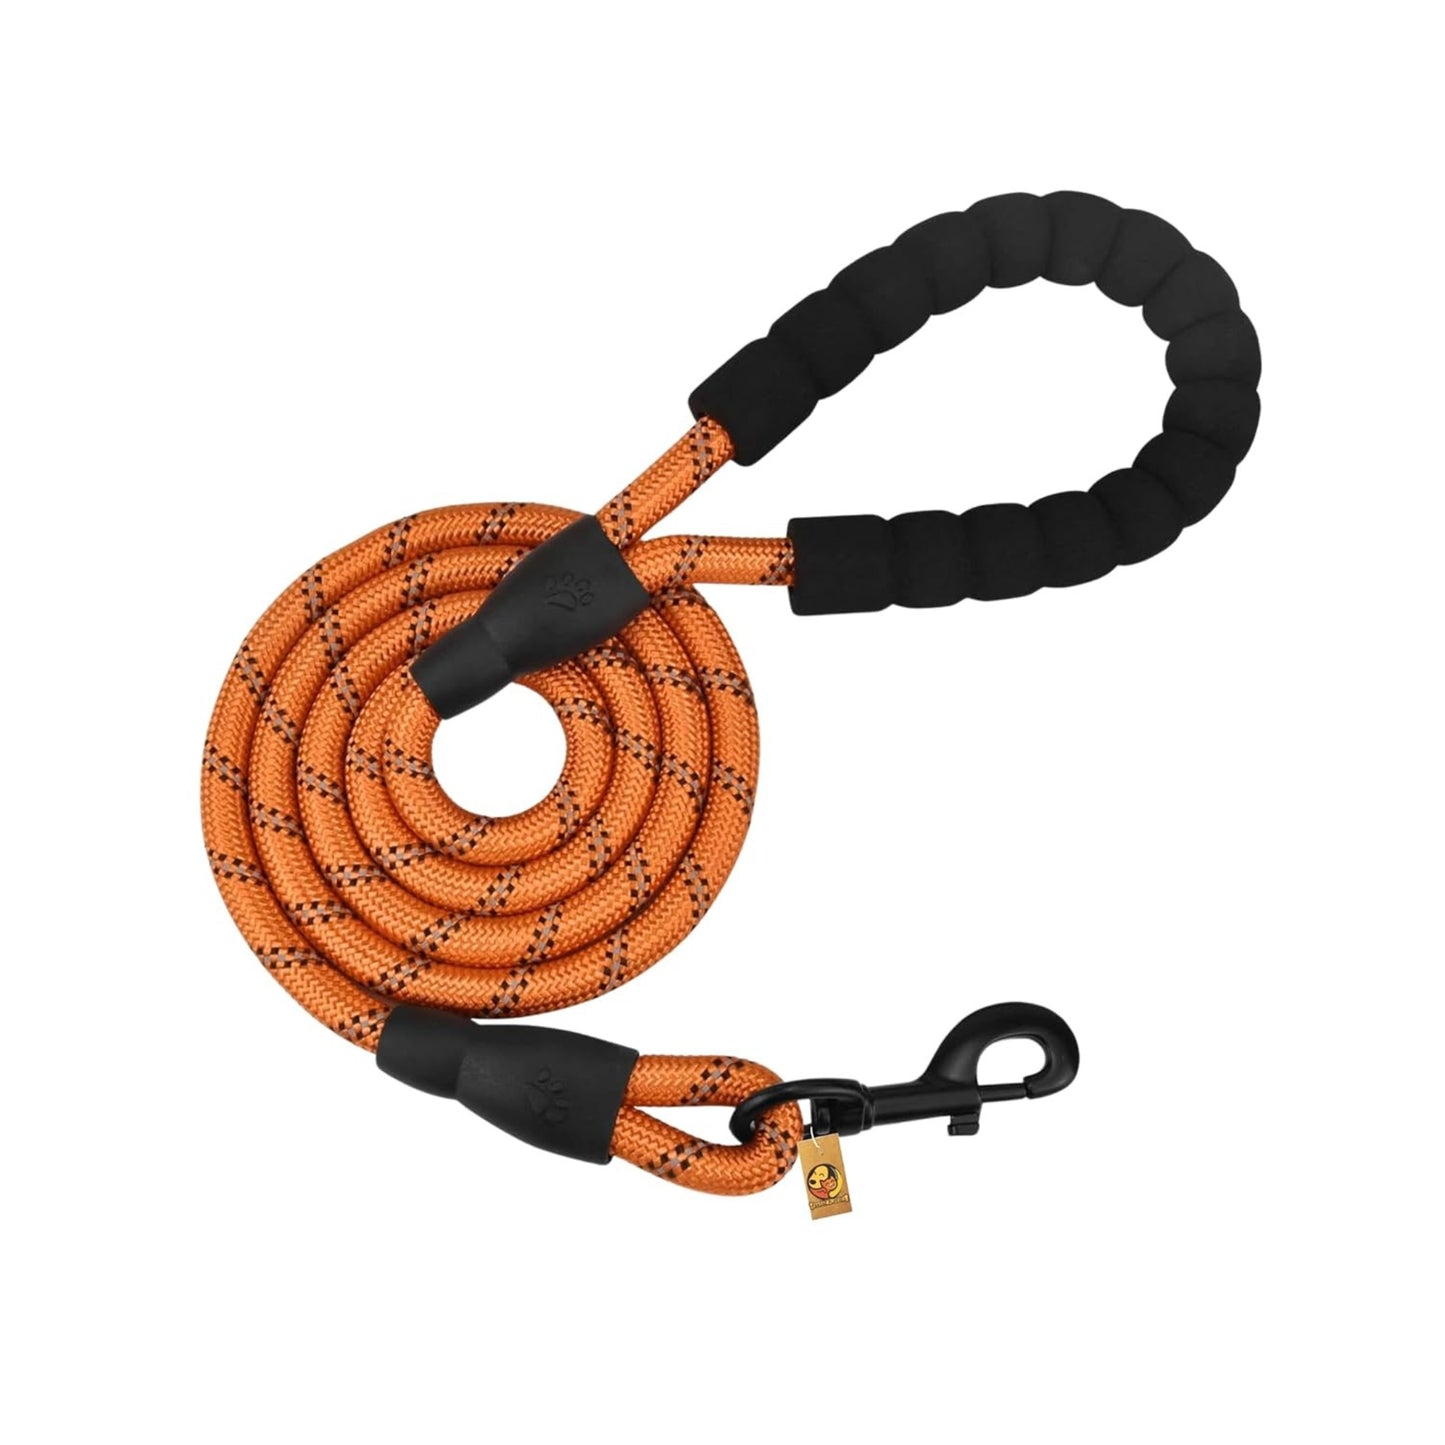 Foodie Puppies Reflective Snug Leash for Small to Medium Dogs, Orange